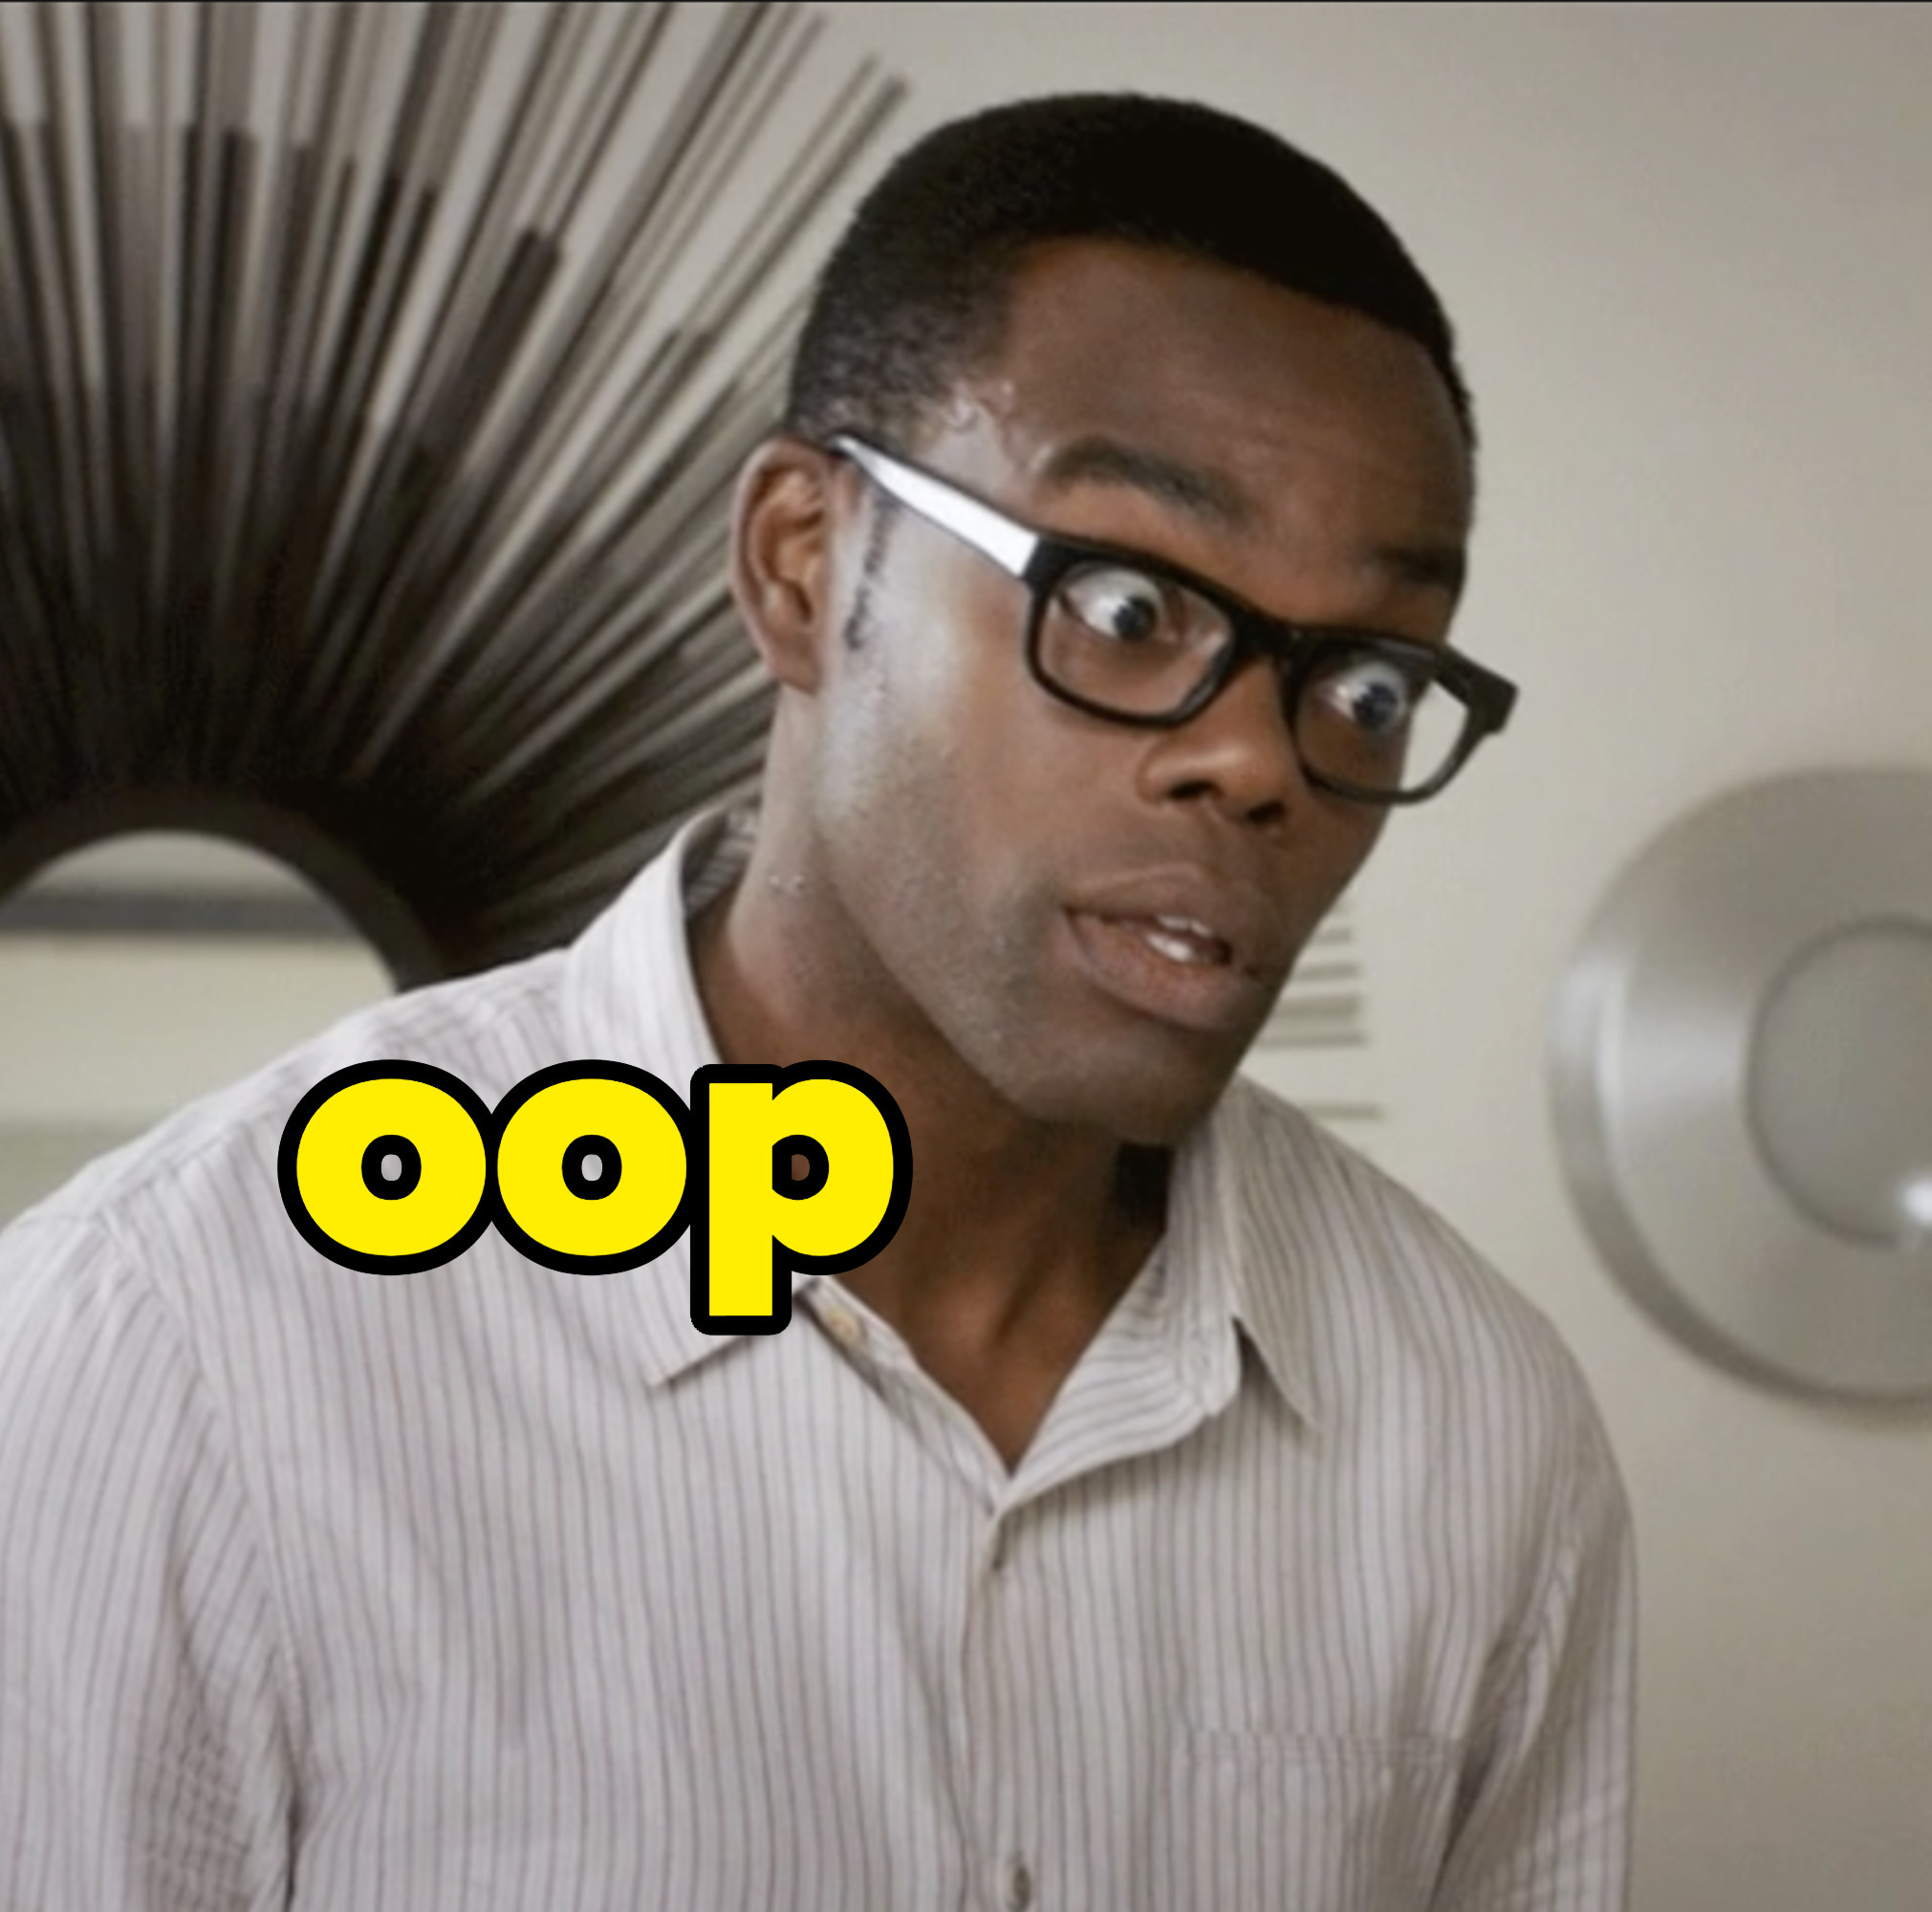 &quot;oop&quot; over shocked chidi anagonye